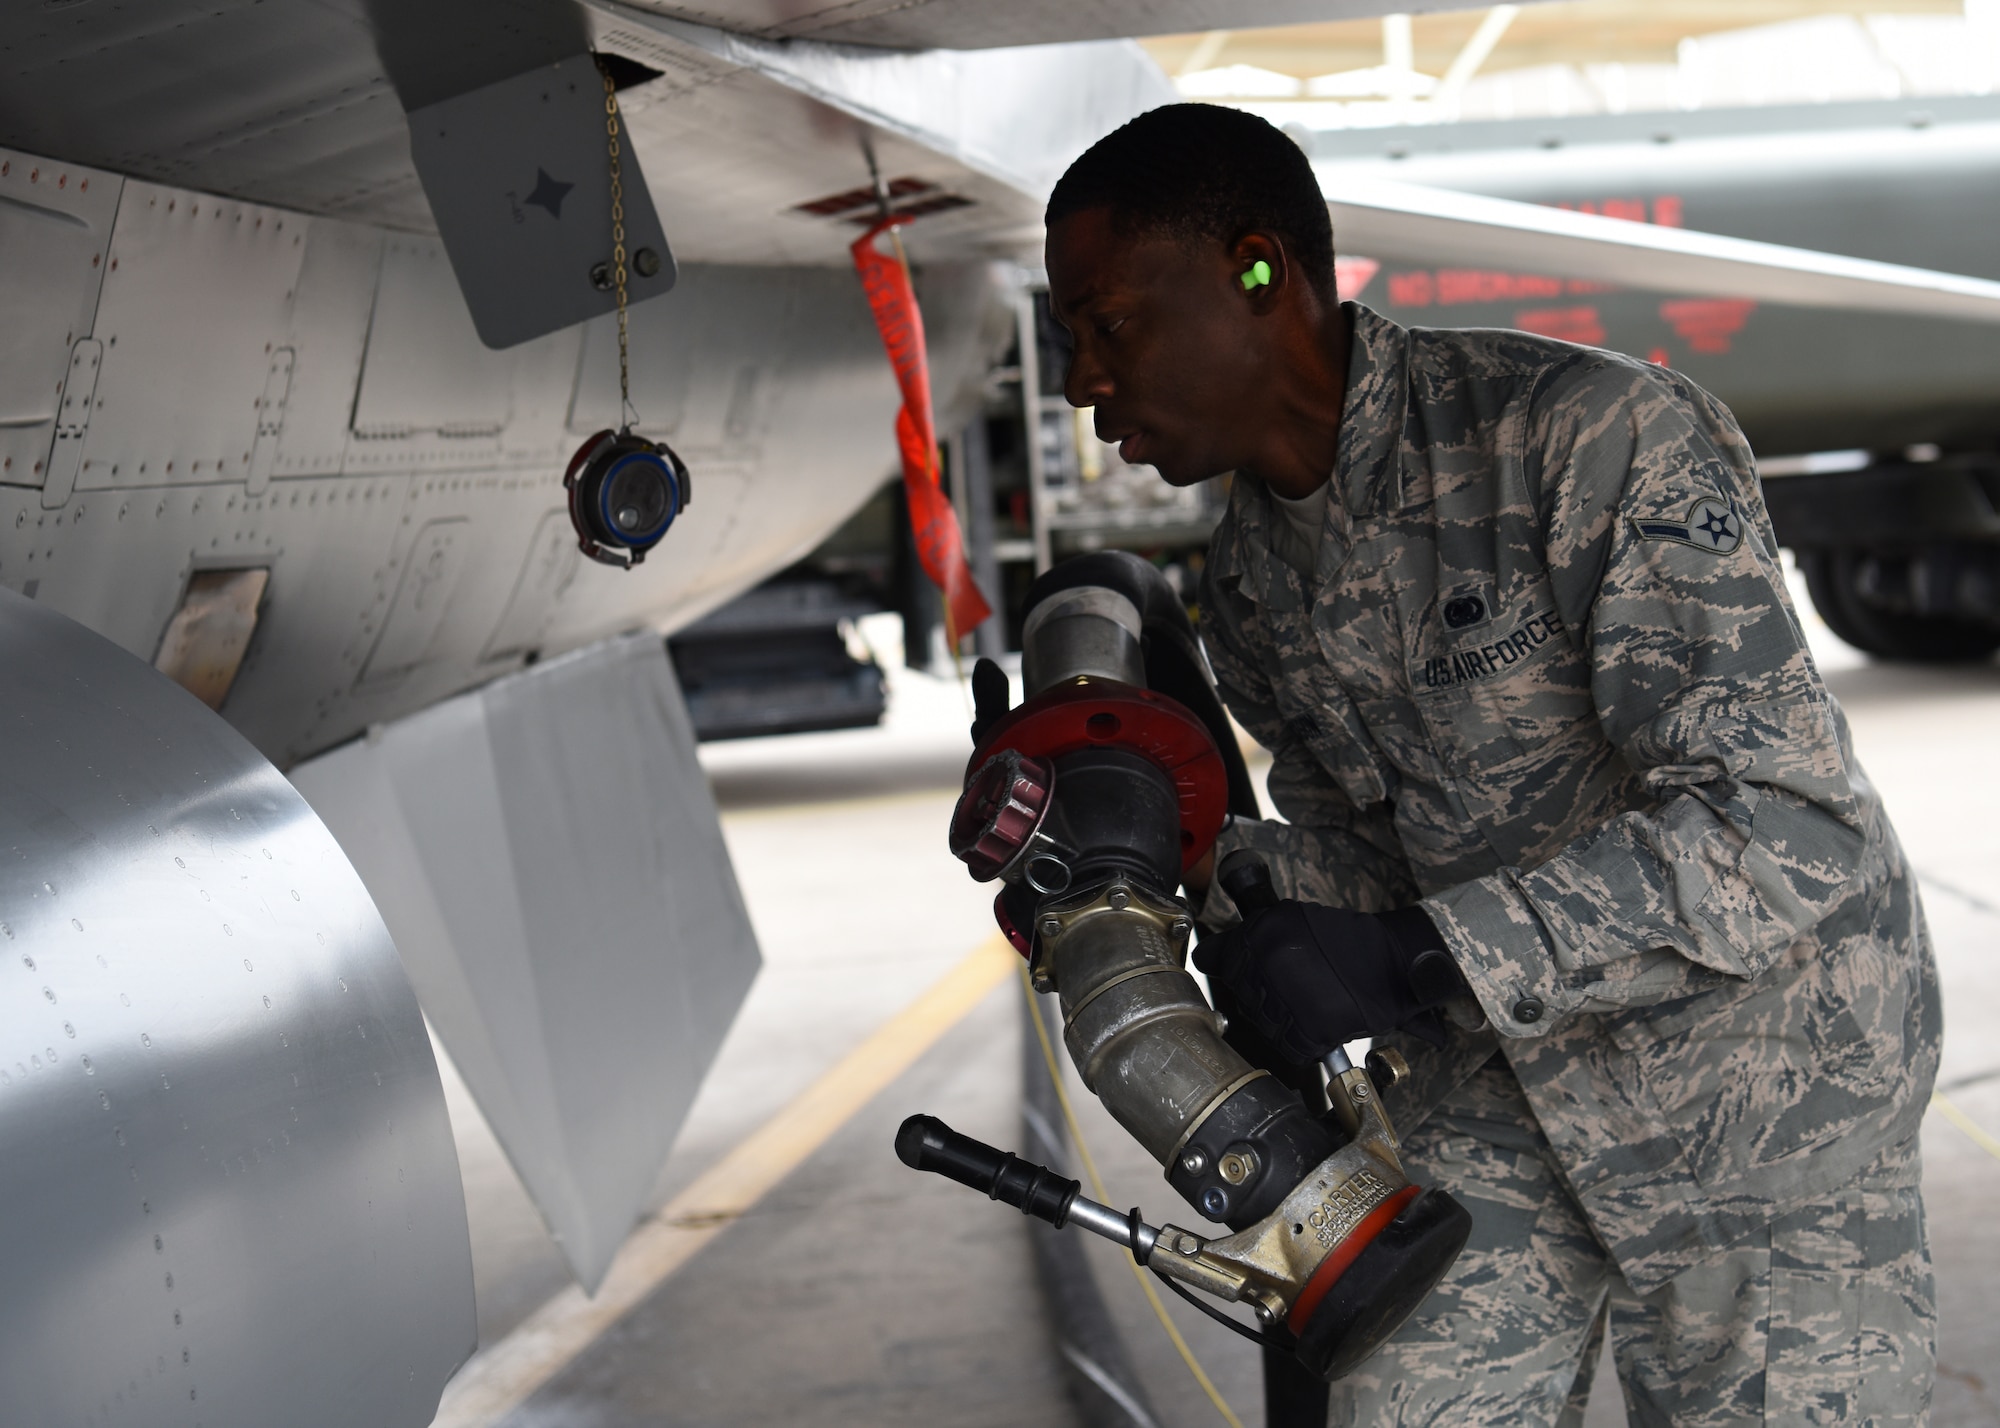 Airman Johnny Jackson, 56th Logistics Readiness Squadron fuels operations distributor, prepares to connect a fuel hose to an F-16 Fighting Falcon April 19, 2018, at Luke Air Force Base, Ariz. Jackson was part of a 56th LRS team that won a fuel truck competition, beating out teams from Davis-Monthan AFB, Ariz. and Nellis AFB, Nev. (U.S. Air Force photo by Airman 1st Class Aspen Reid)